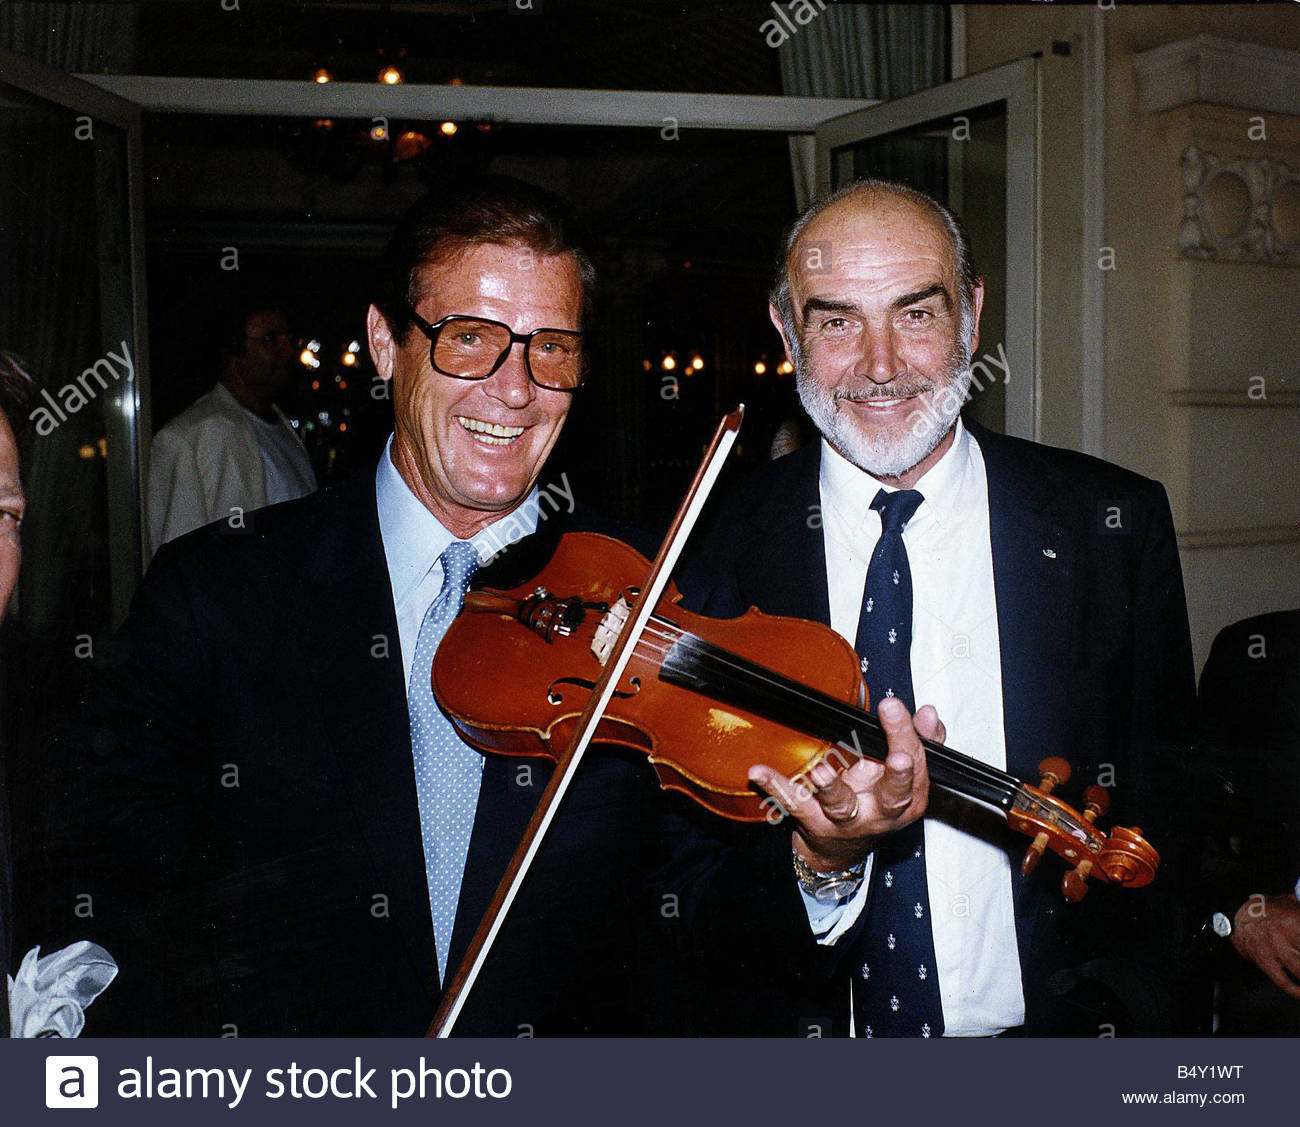 sean-connery-and-roger-moore-actors-from-james-bond-films-meet-whilst-B4Y1WT.jpg